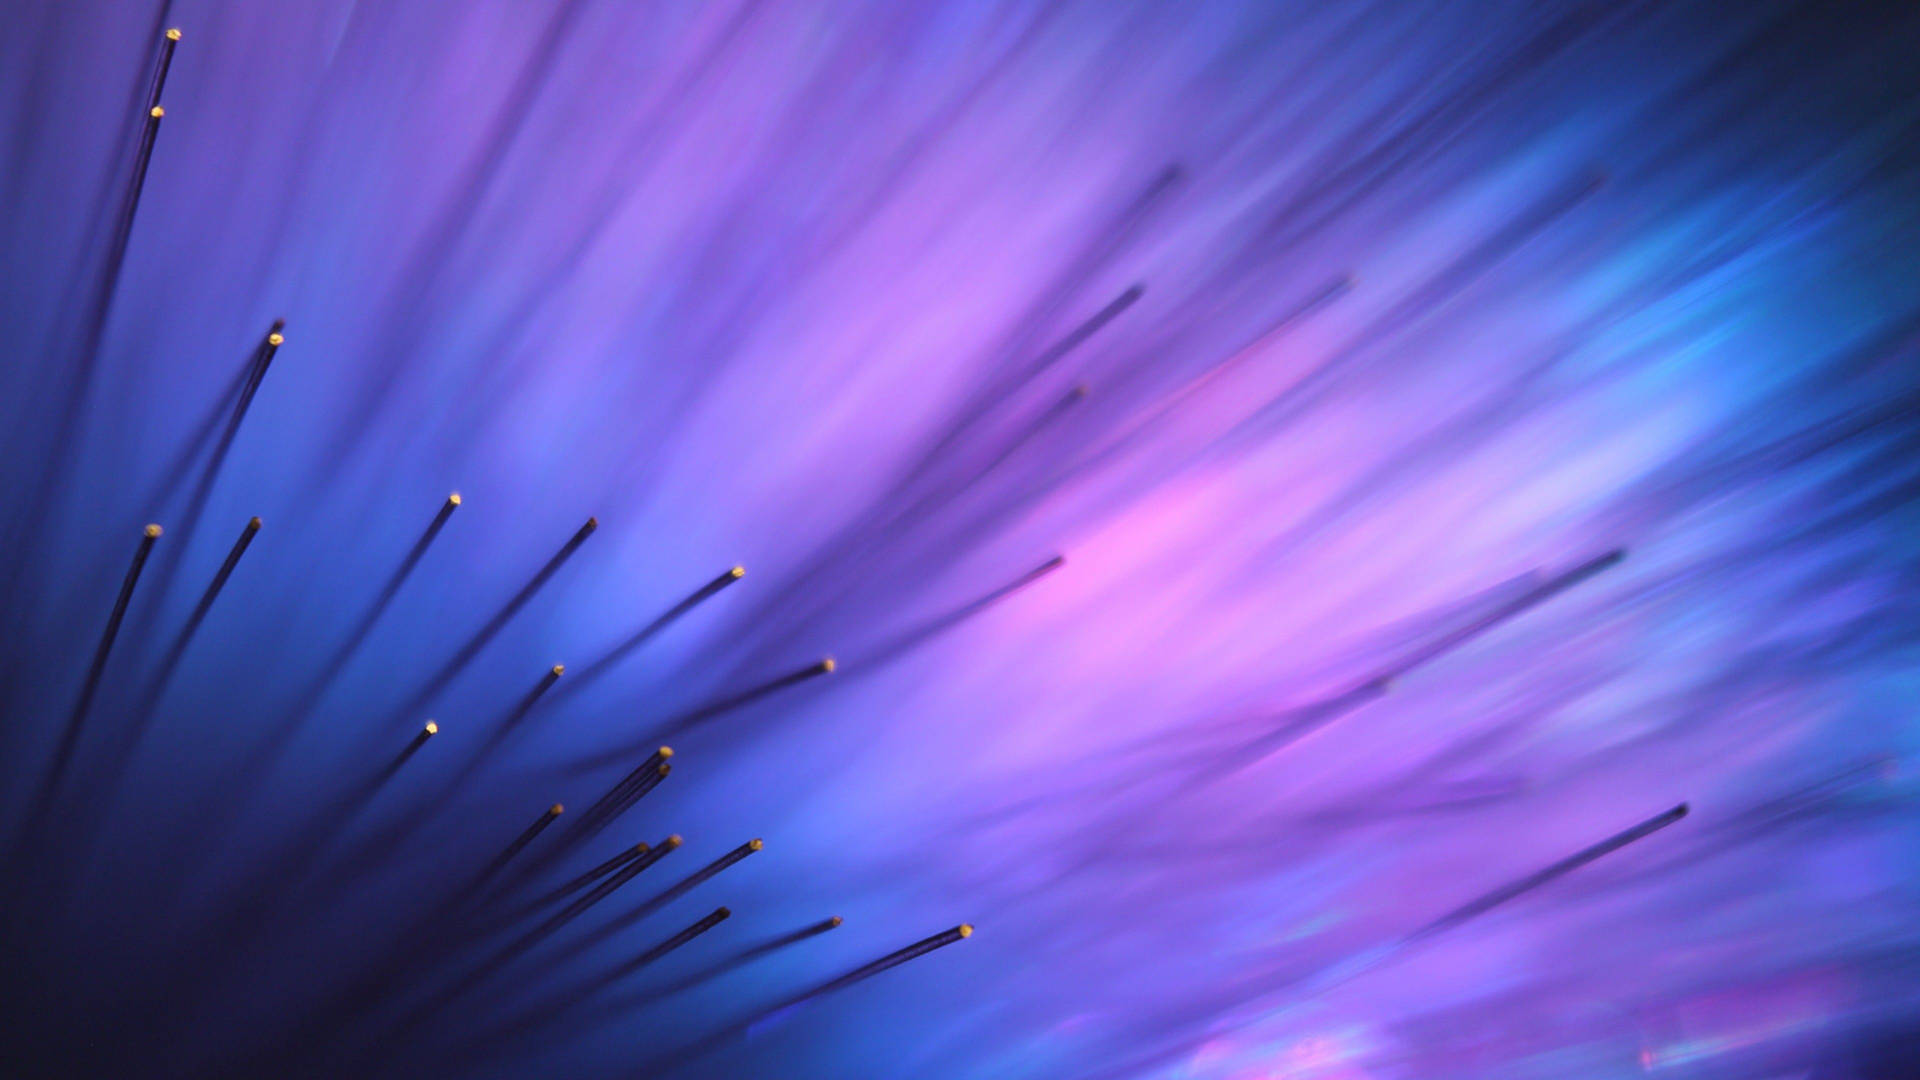 A Purple And Blue Flower With A Lot Of Spikes Wallpaper